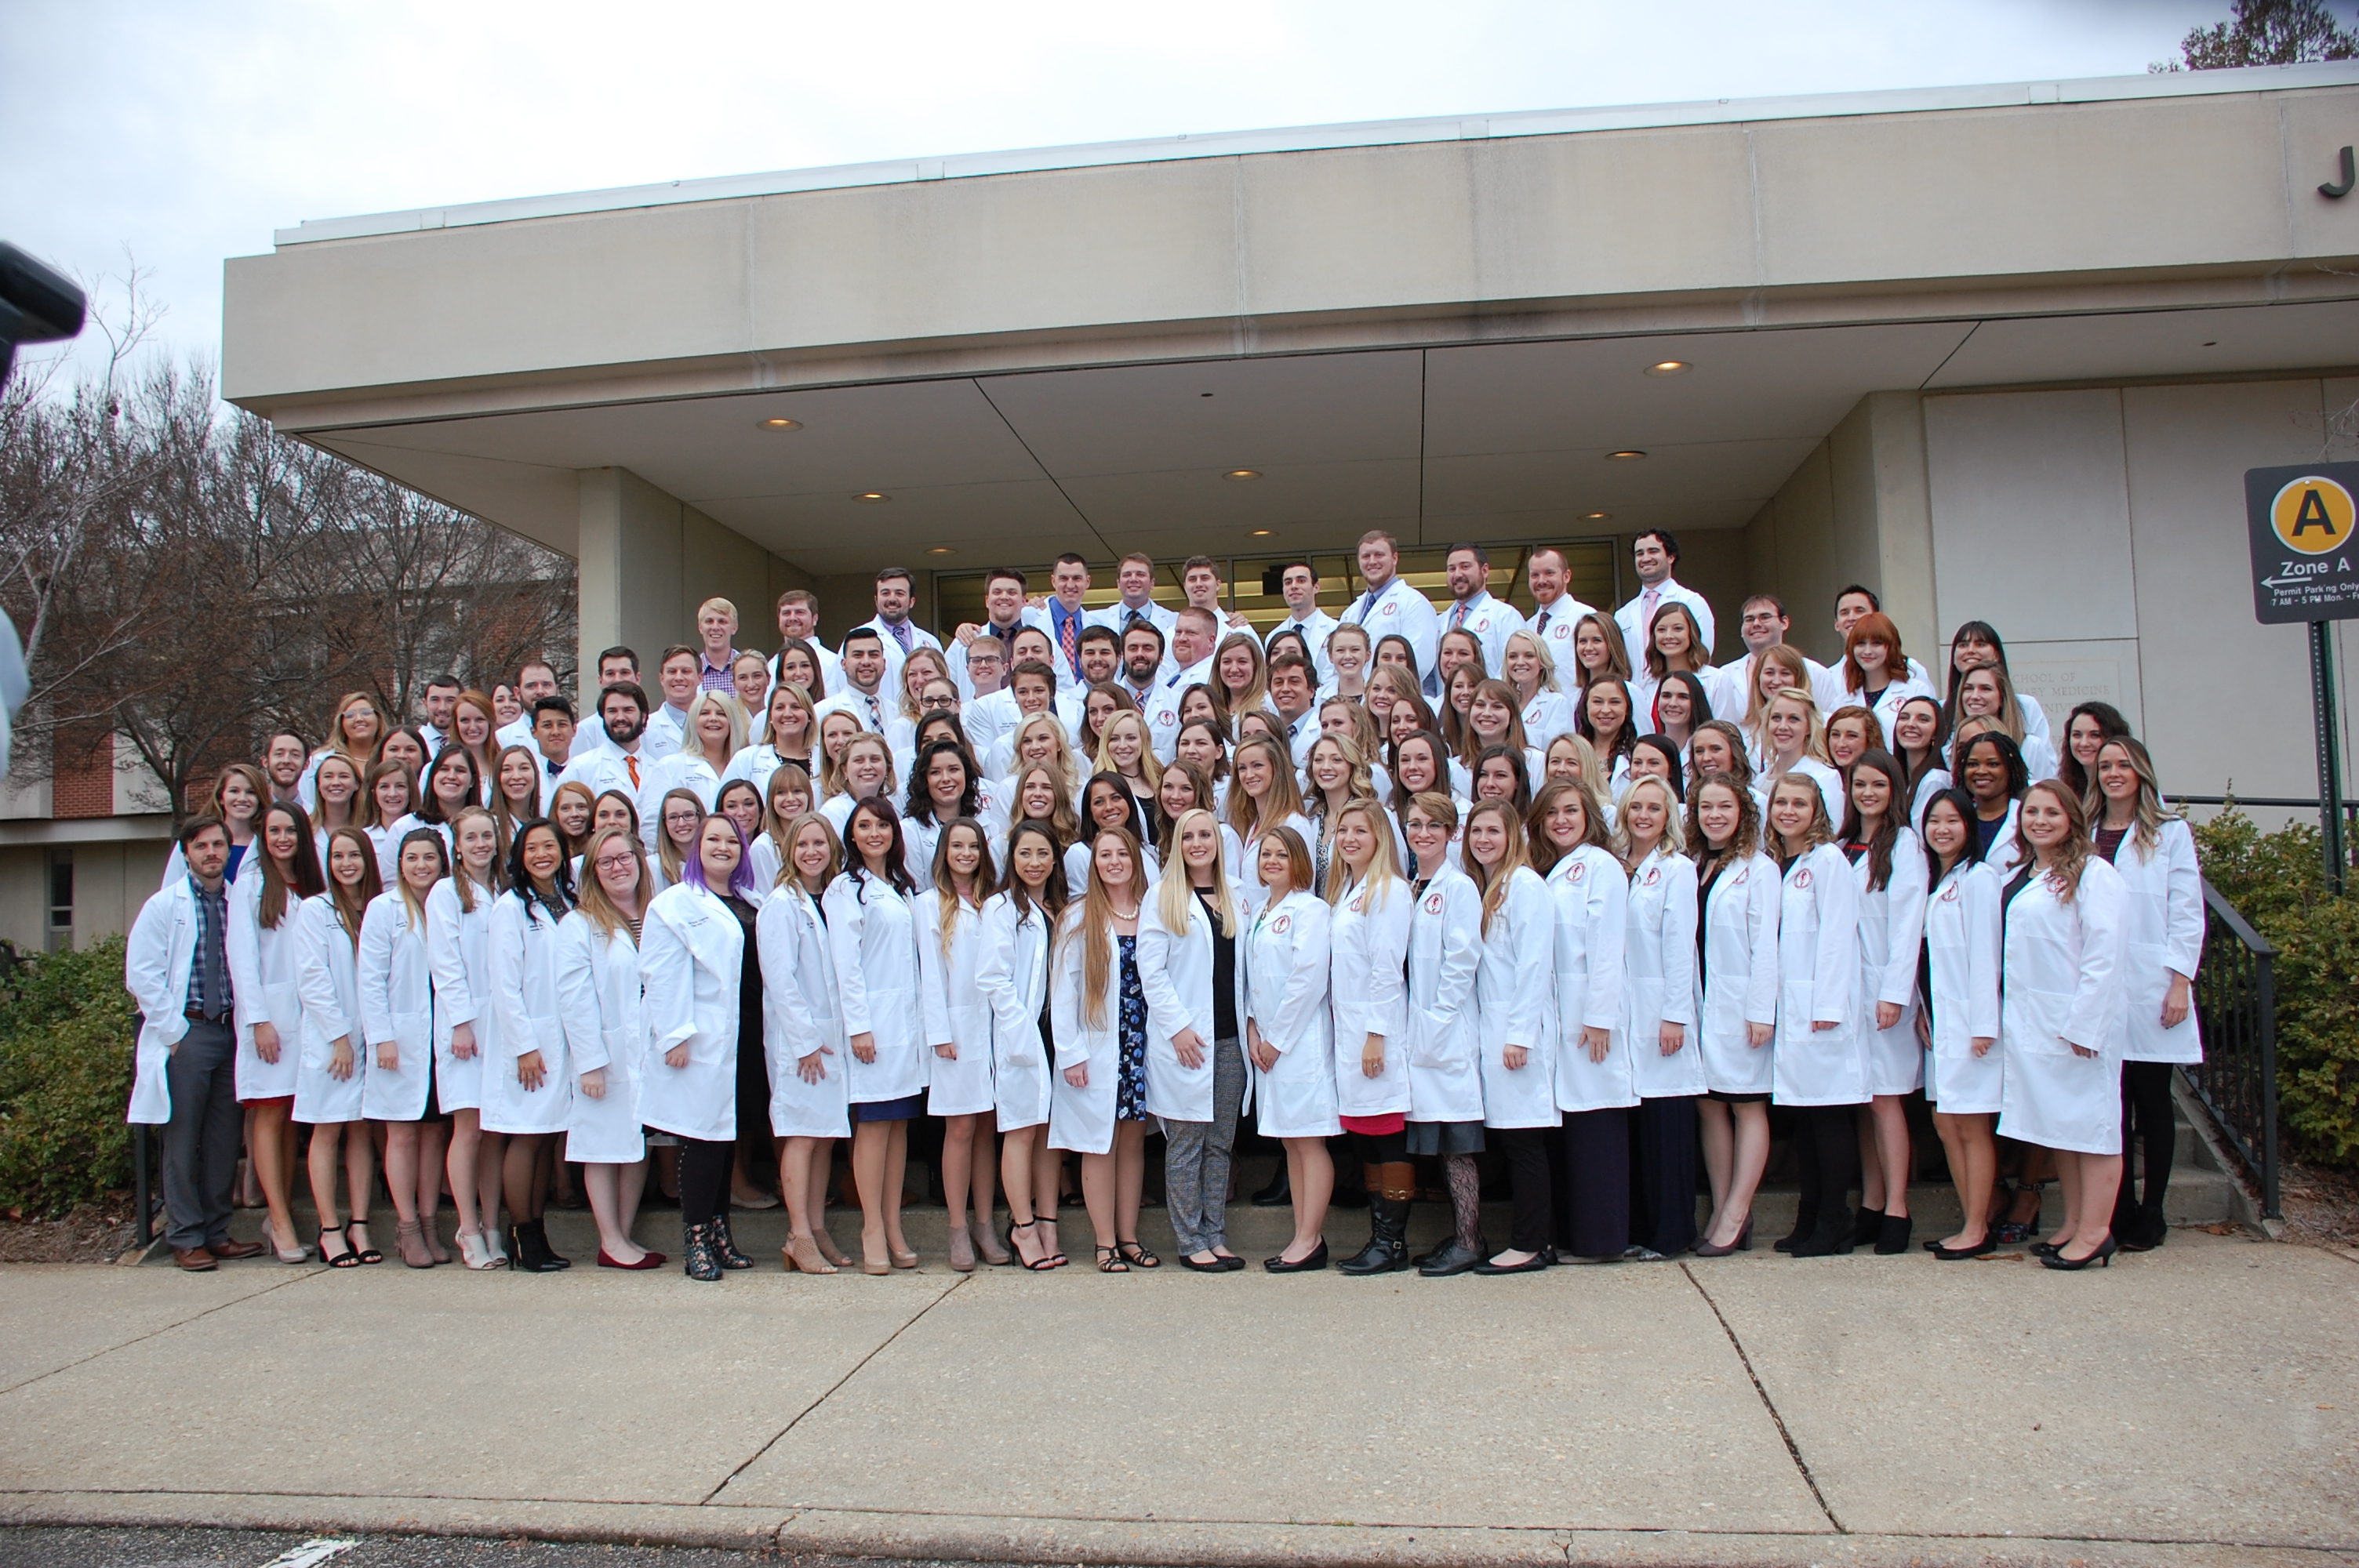 Members of the class of 2019 pose for a group photo after receiving their white coats in 2018.